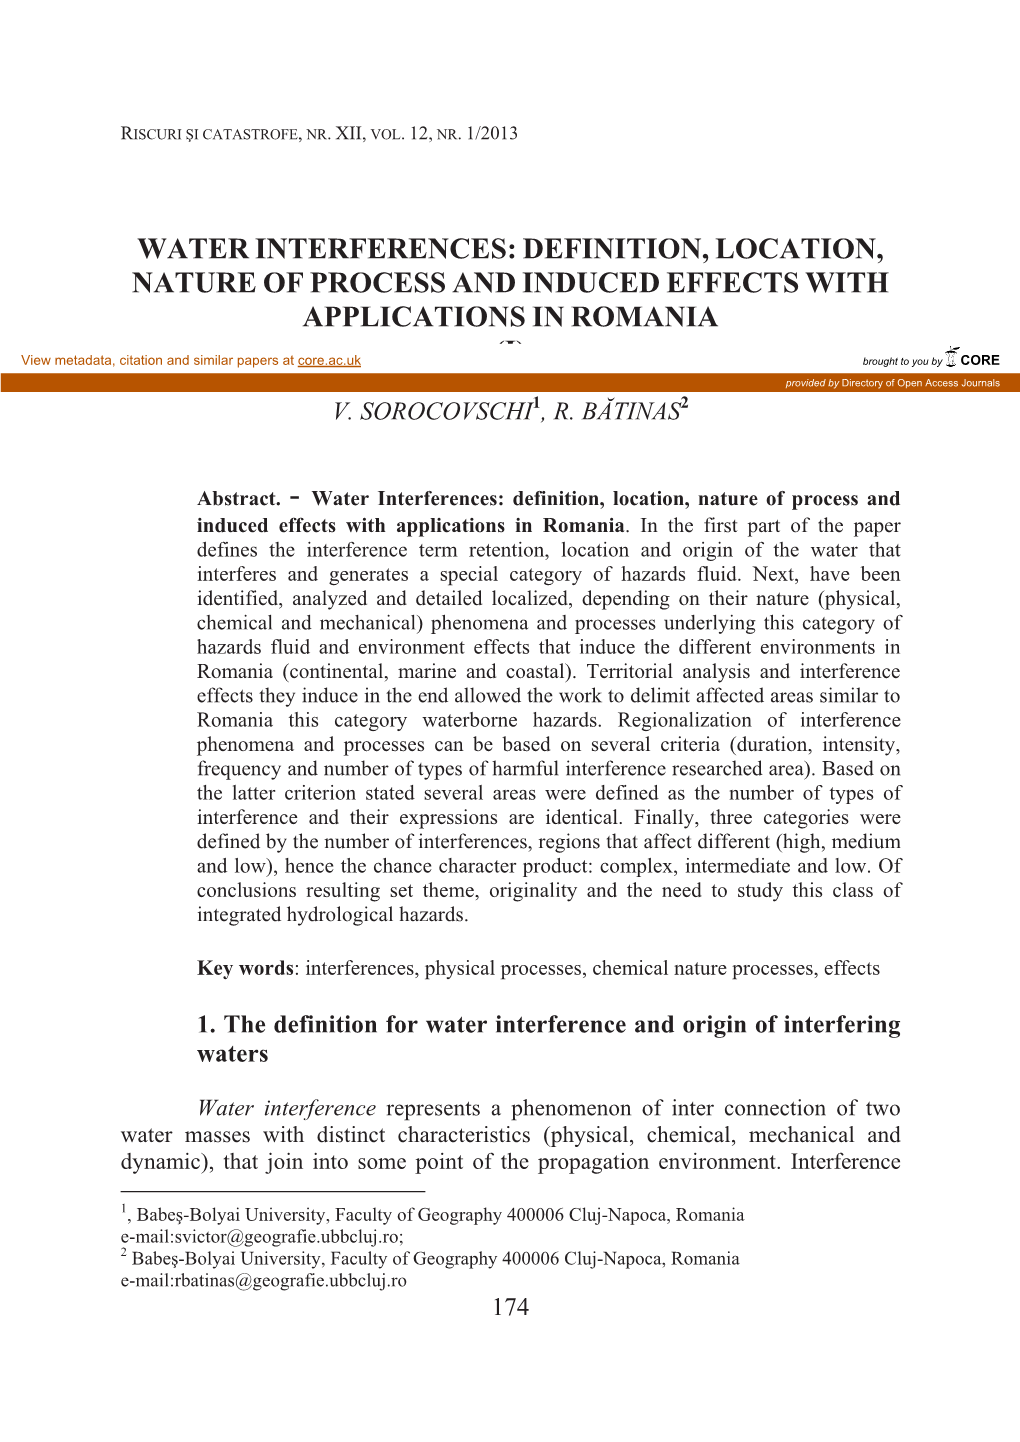 Water Interferences: Definition, Location, Nature of Process and Induced Effects with Applications in Romania